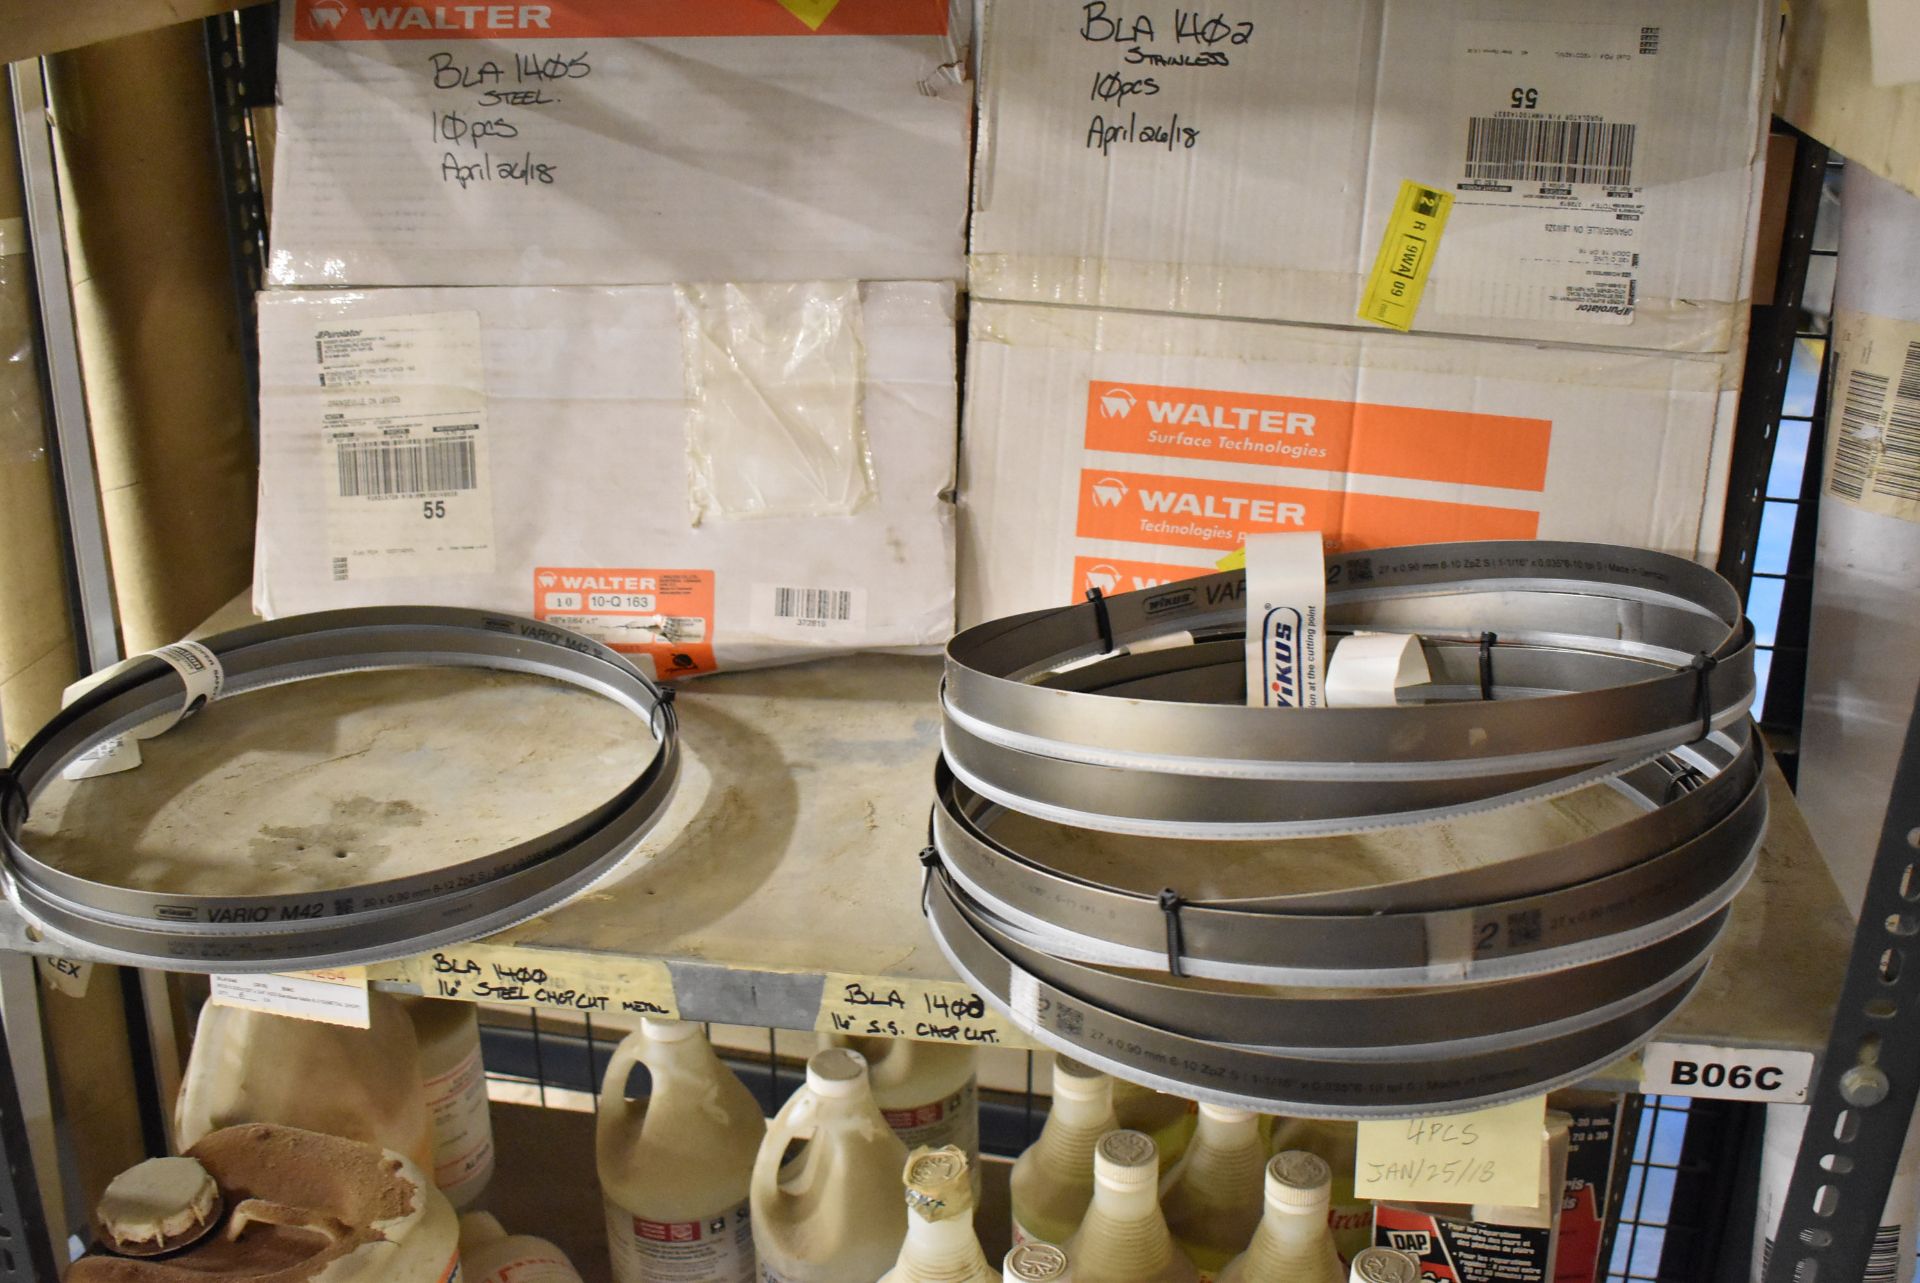 LOT/ CONTENTS OF SHELVES - BAND SAW BLADES, CIRCULAR SAW BLADES, PAINTS, CHEMICALS - Image 2 of 2